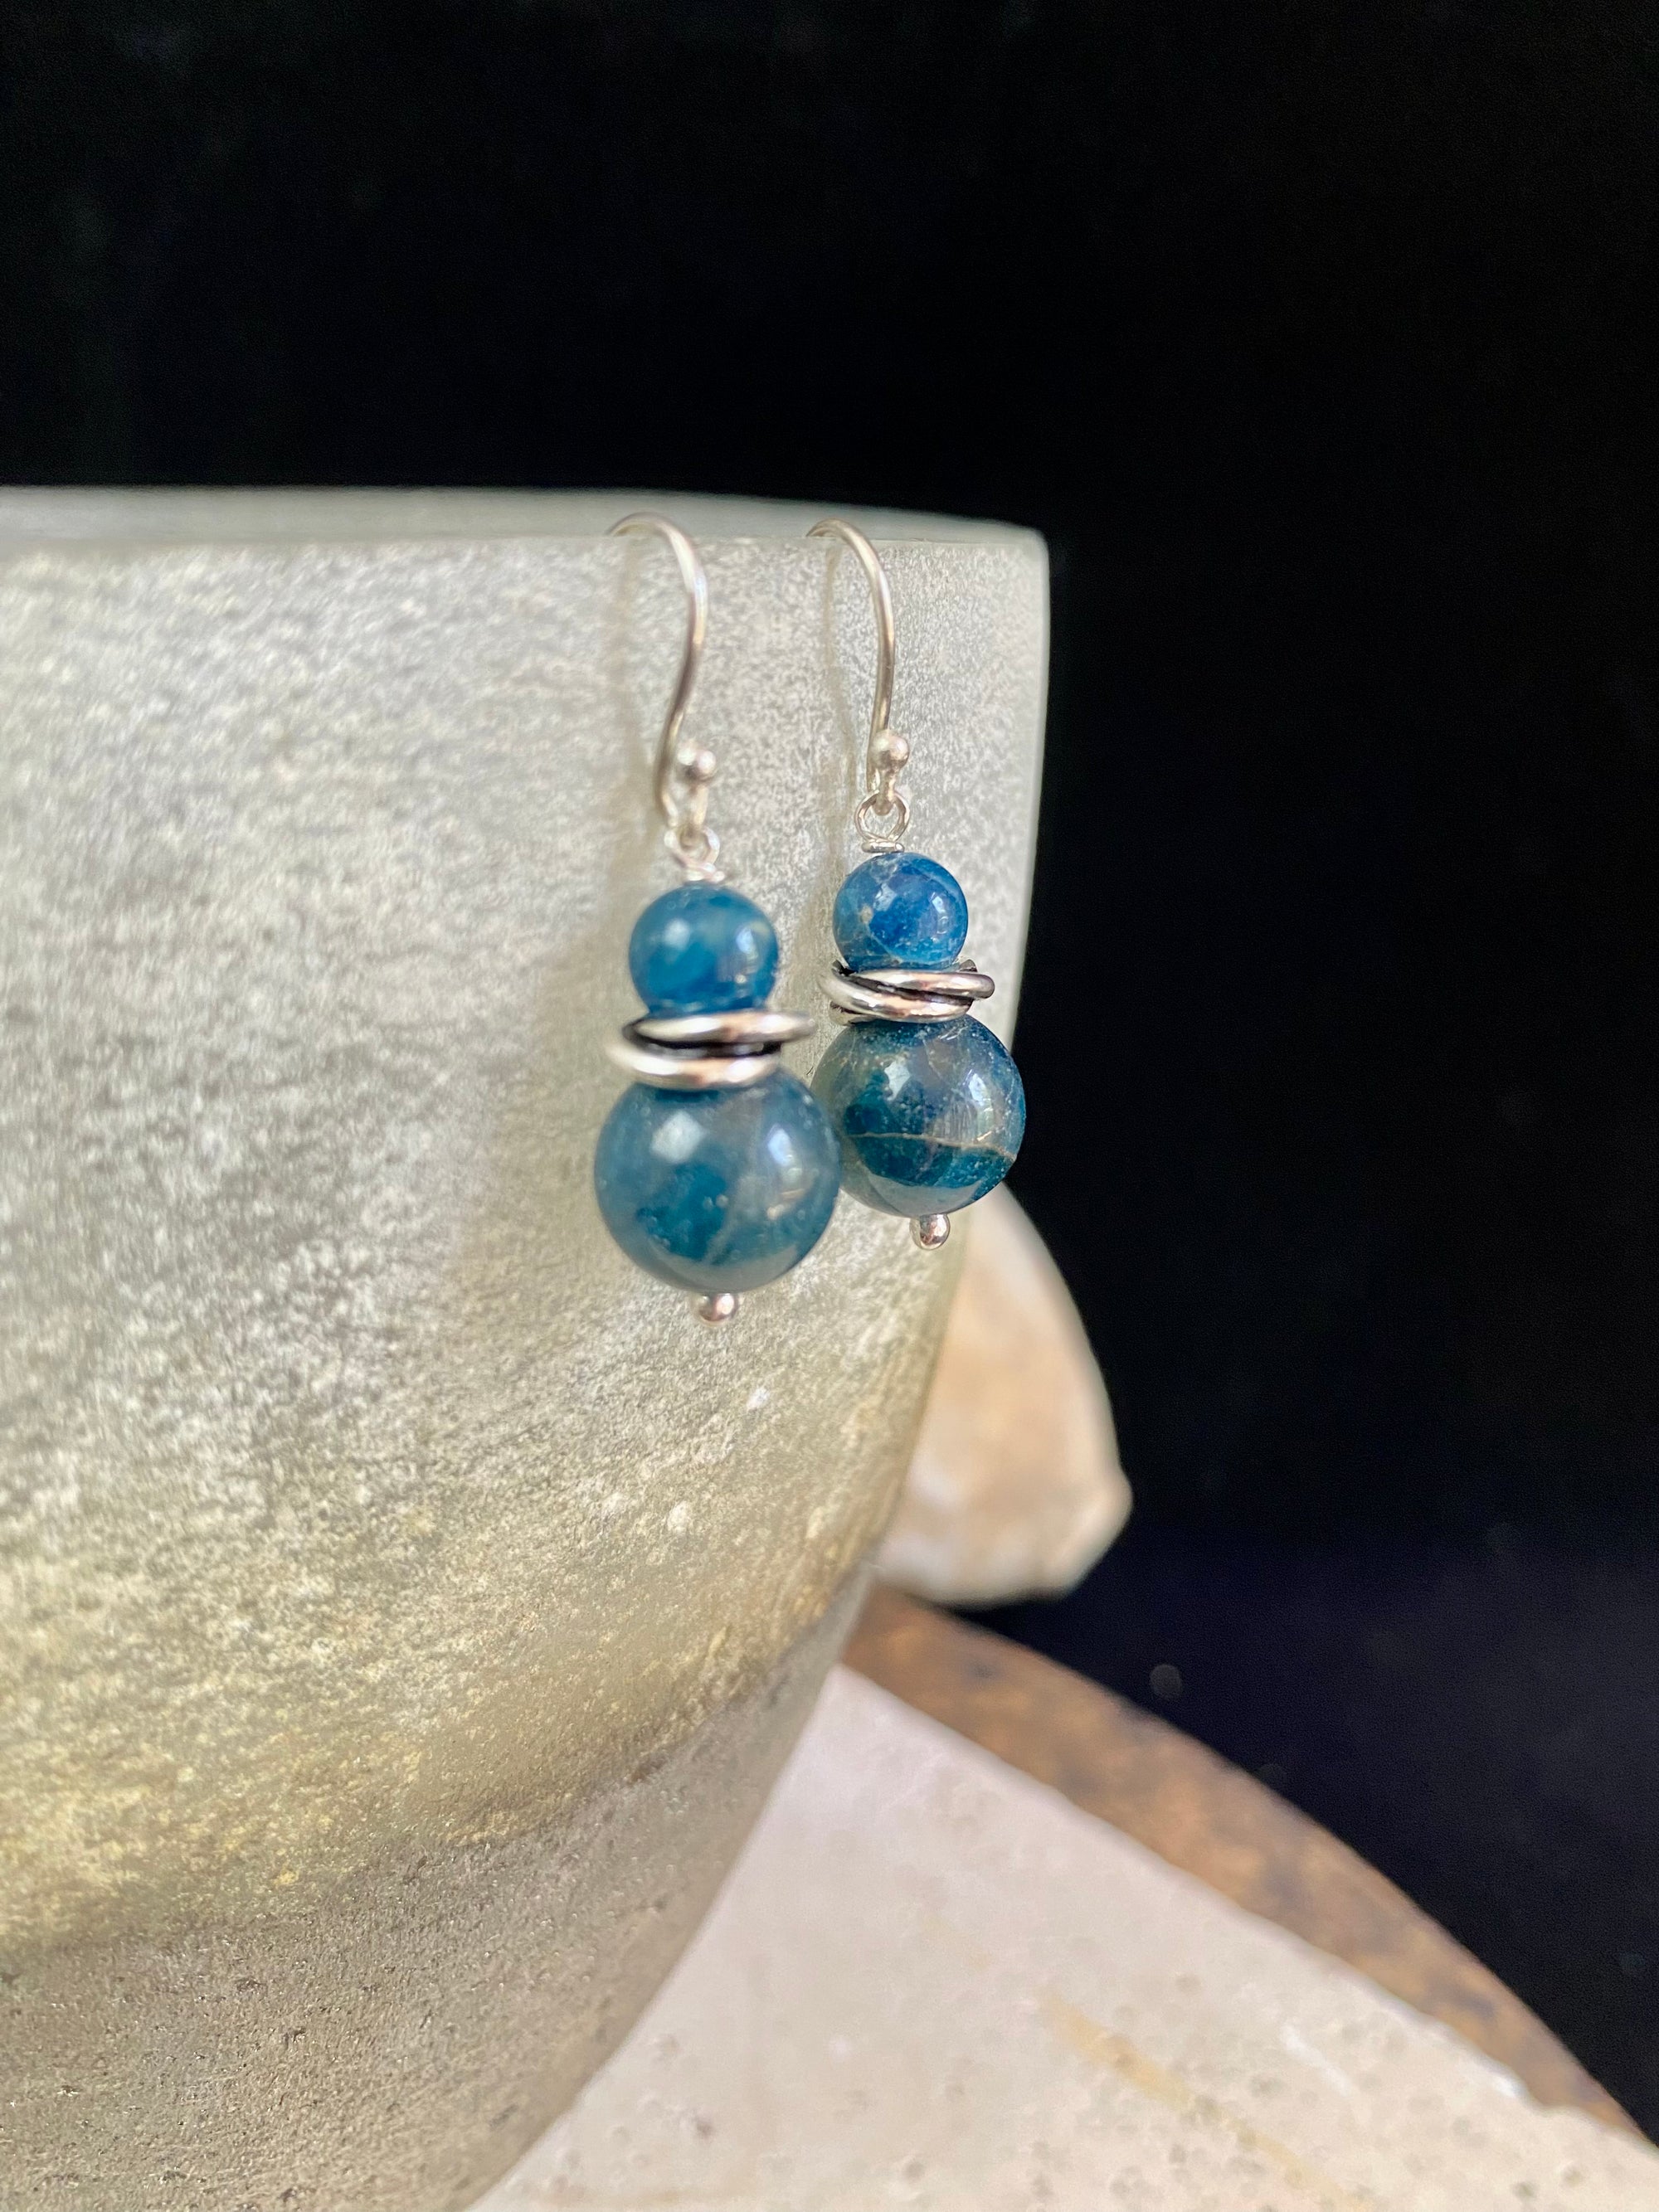 Simple, elegant apatite earrings featuring natural blue, graduated beads, finished with sterling silver detailing and hooks.   Apatite earring featuring sterling silver decoration 925 sterling silver shepherd hooks high quality natural stones light and easy to wear  Measurements: 3.3 cm  height including hook 